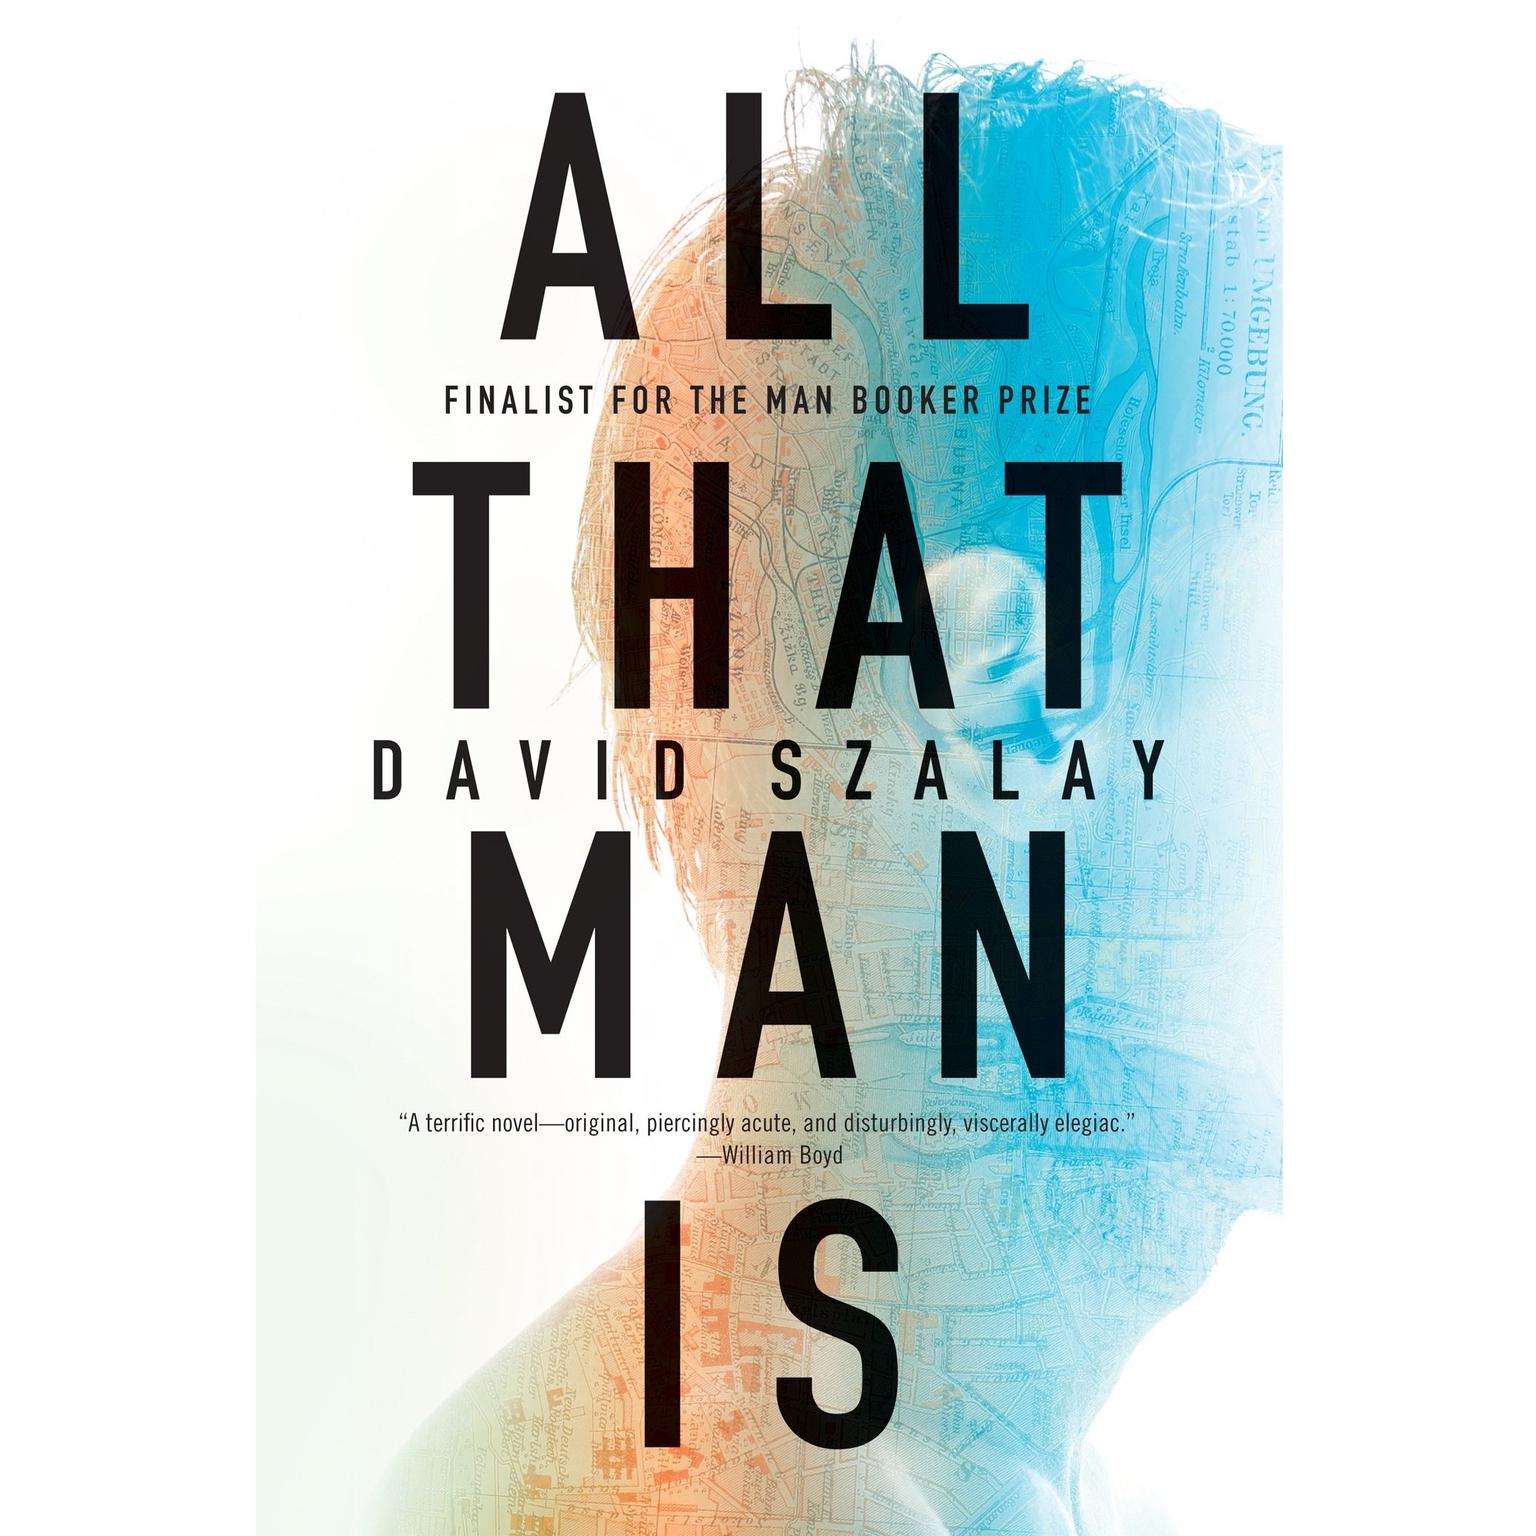 All That Man Is Audiobook, by David Szalay